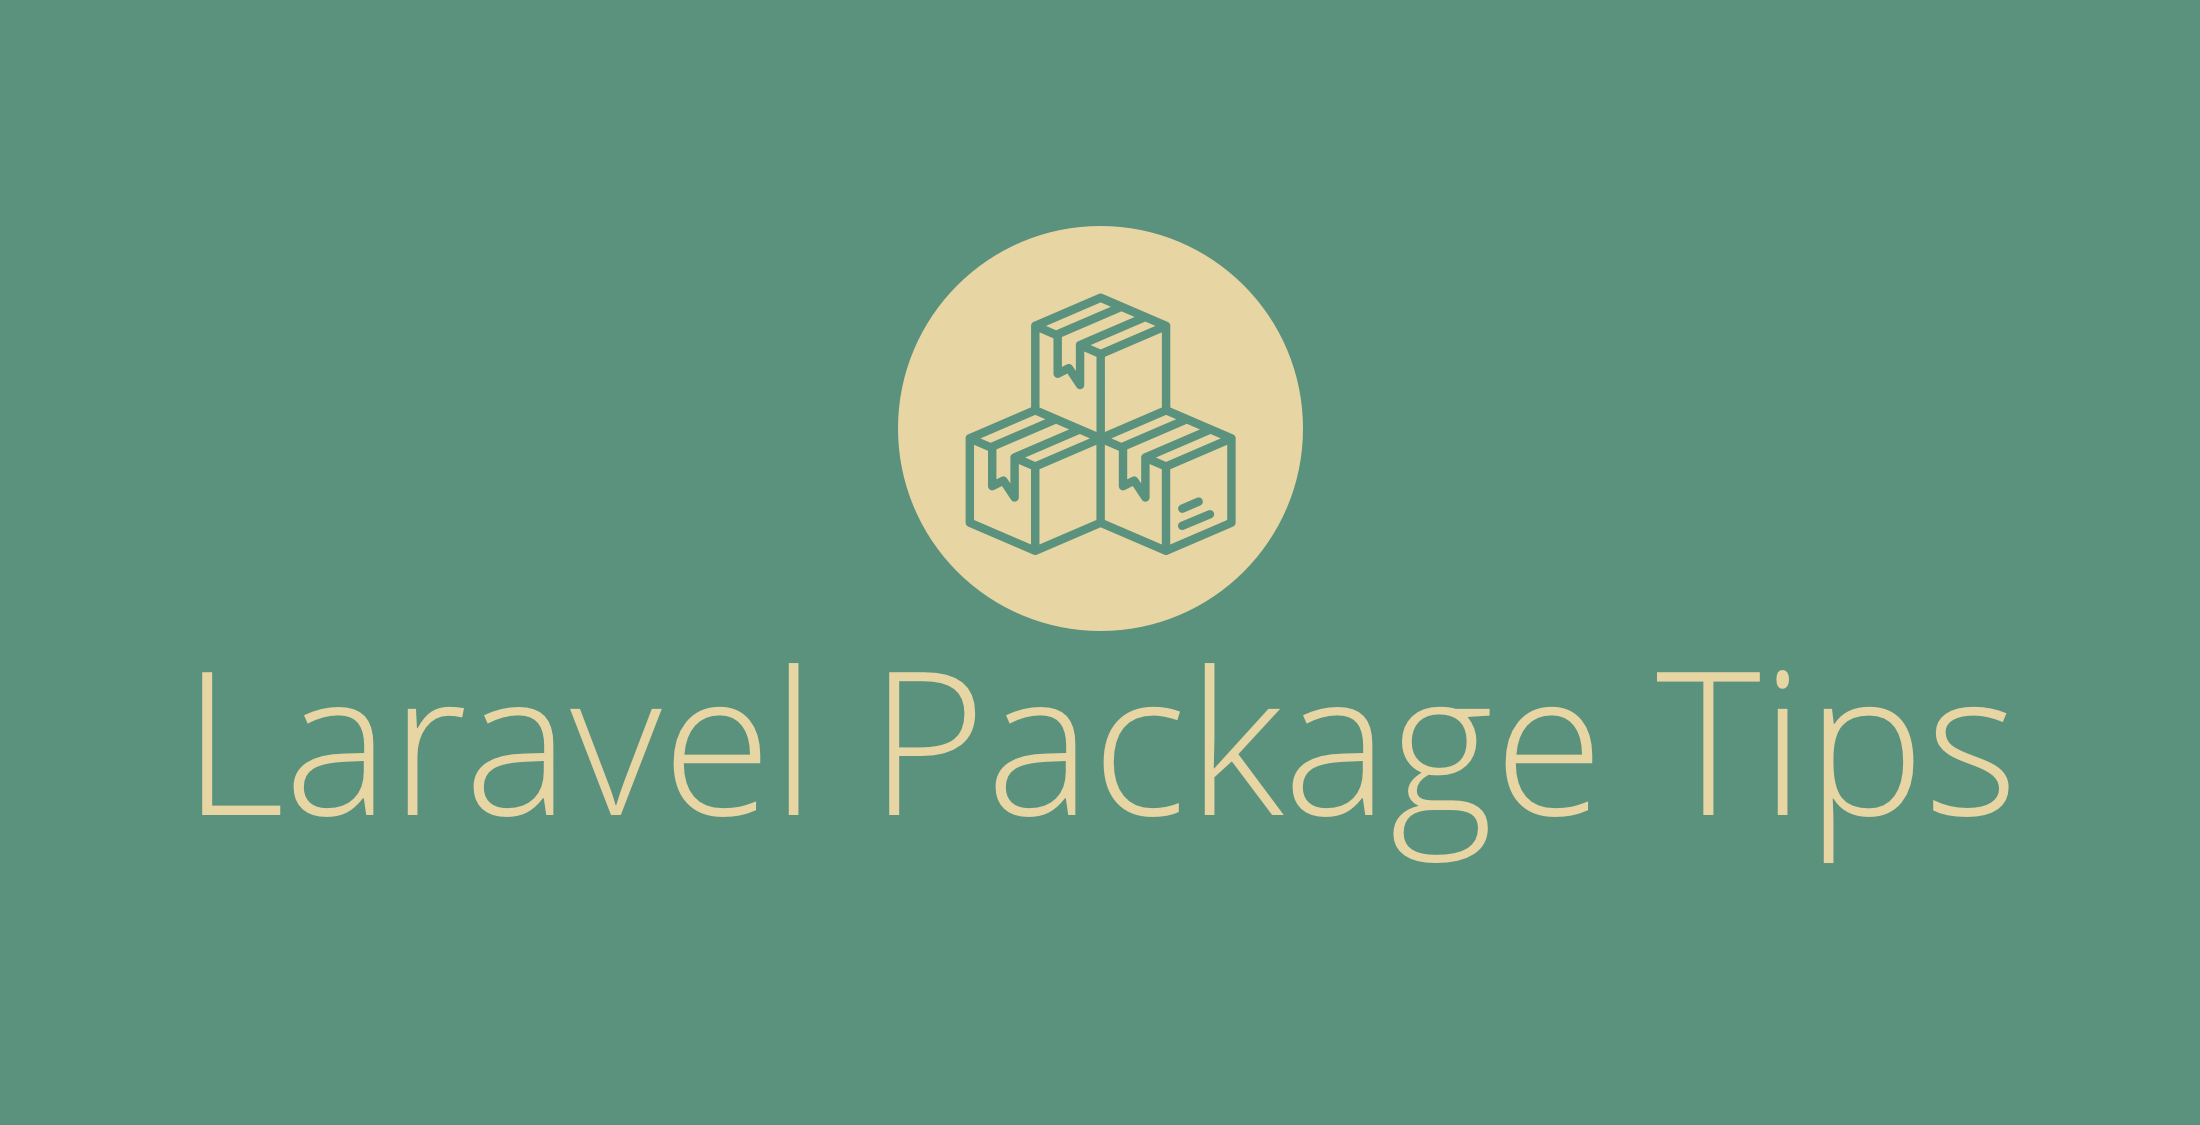 External API calling in Laravel by Guzzle Package